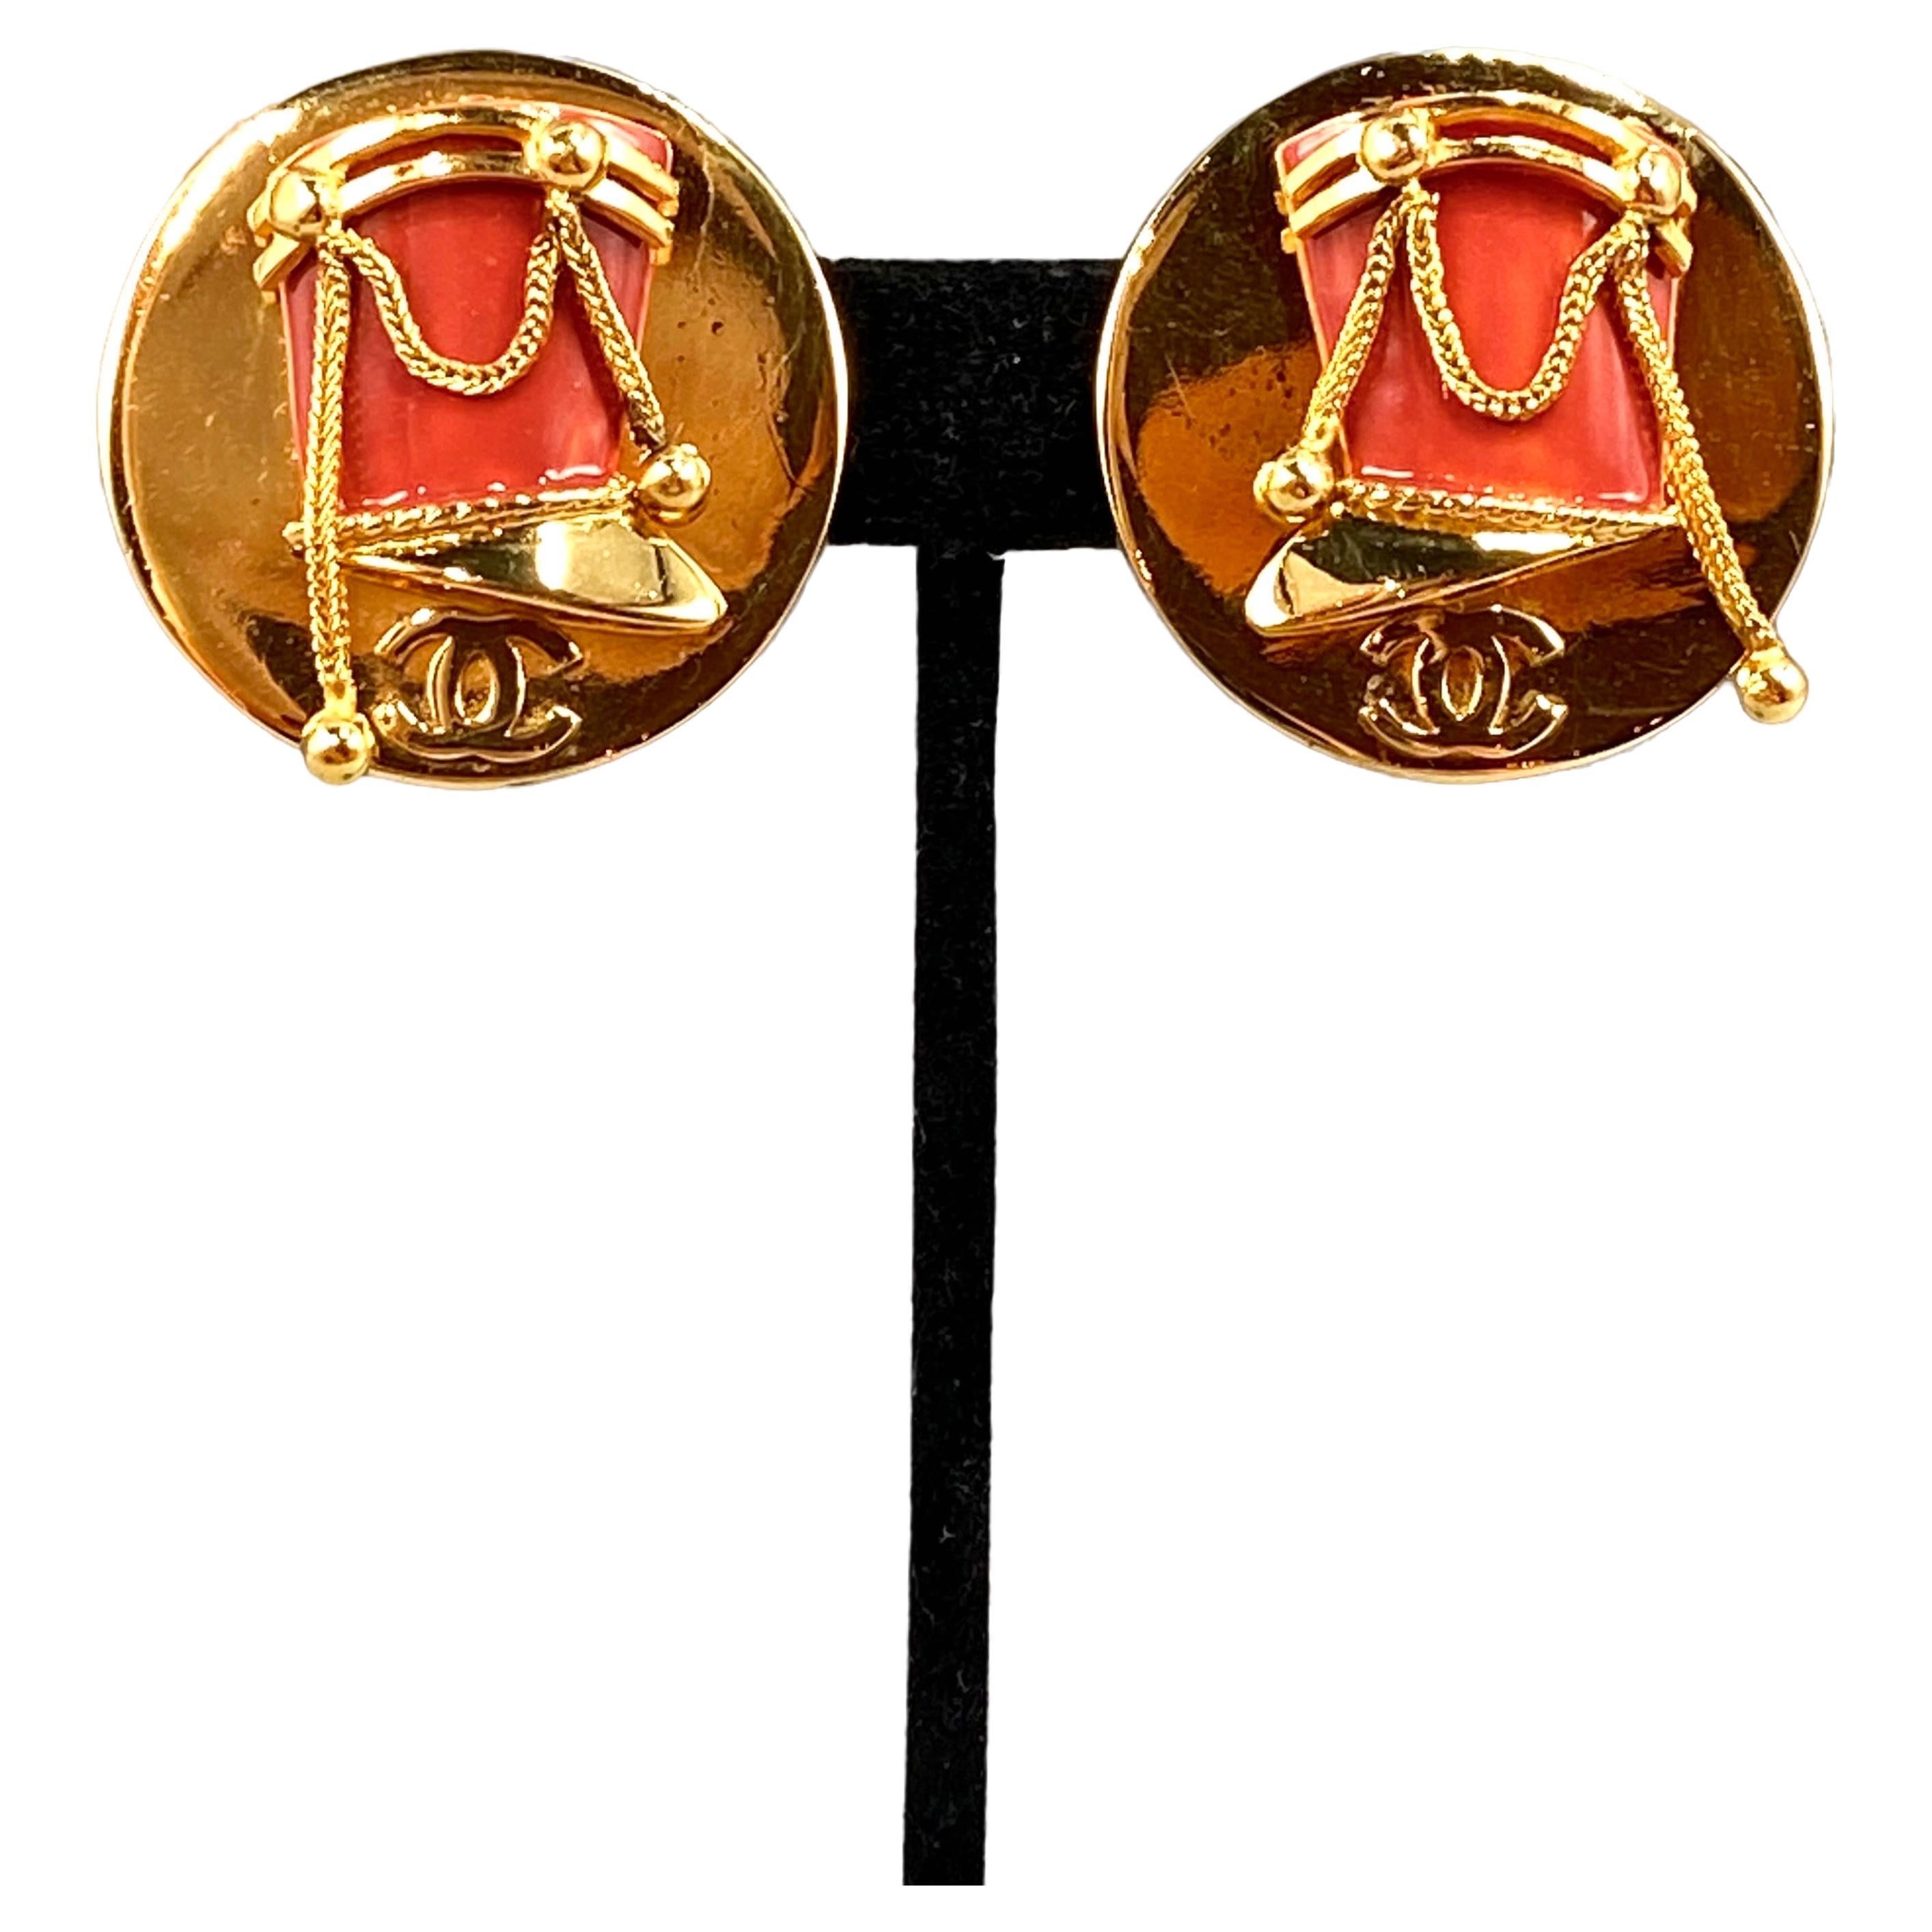 A rare pair of large Chanel button earrings from the early 1970s. Each measures 1.5 inches in diameter and features a three dimensional French military hat. The hat is accented with red enamel and free hanging gold chain swag with ball ends. Below